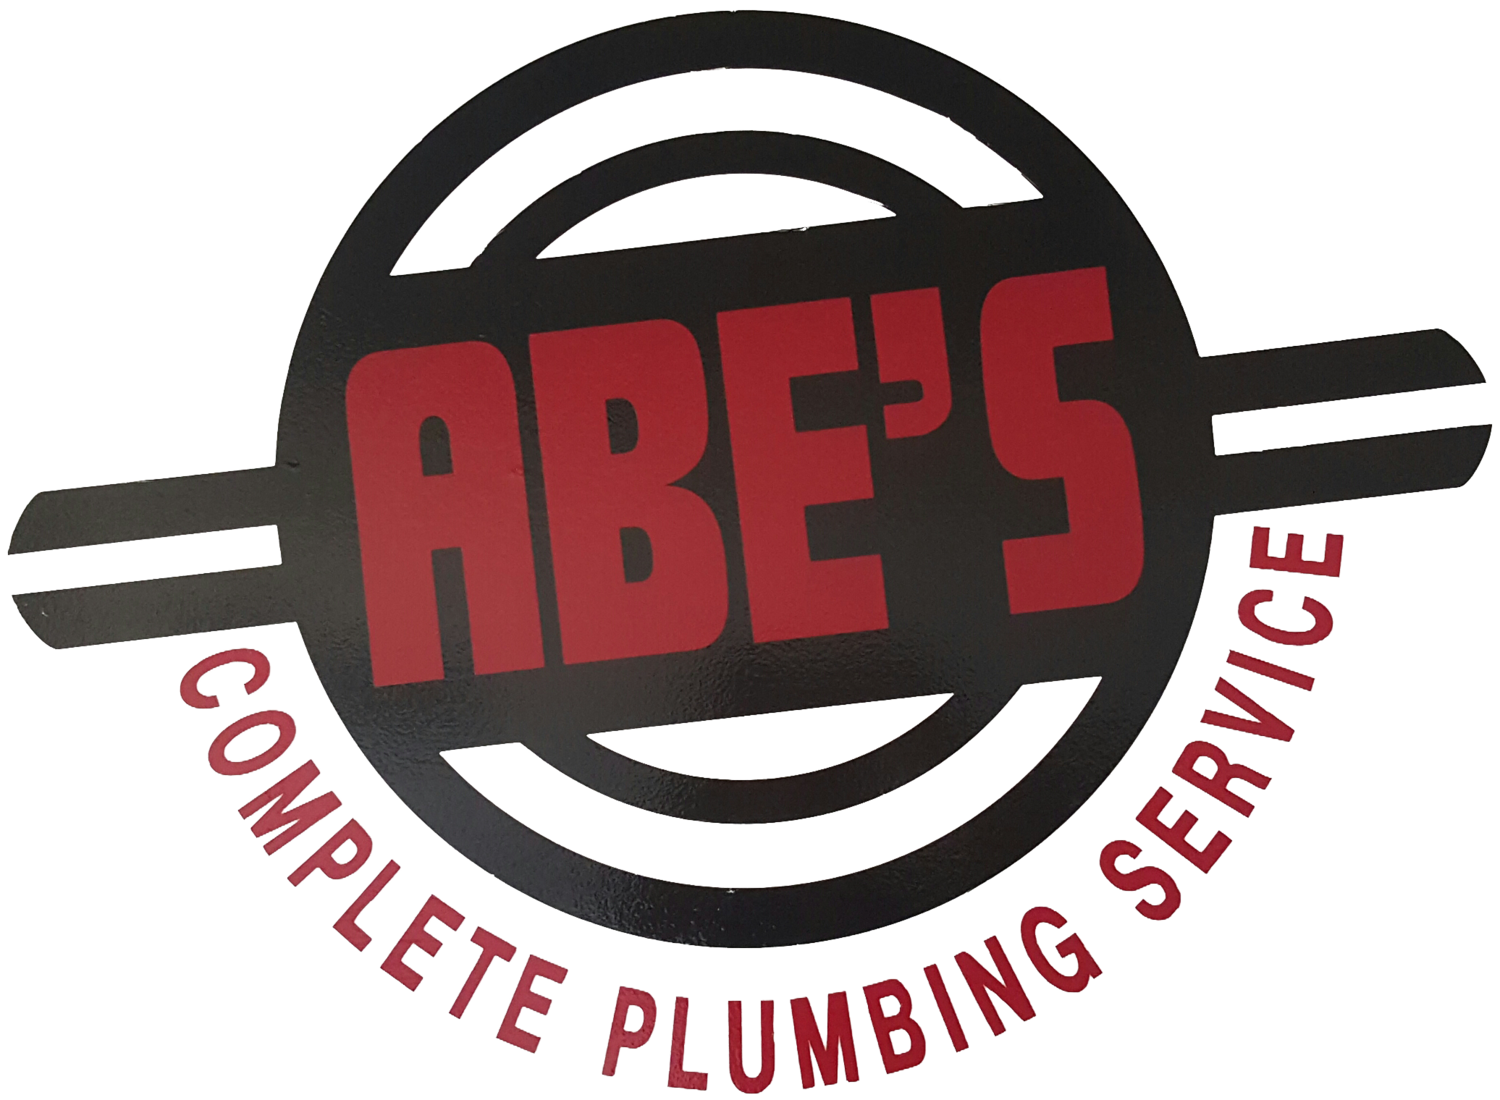 Leaking or abe s. Faucet clipart toilet